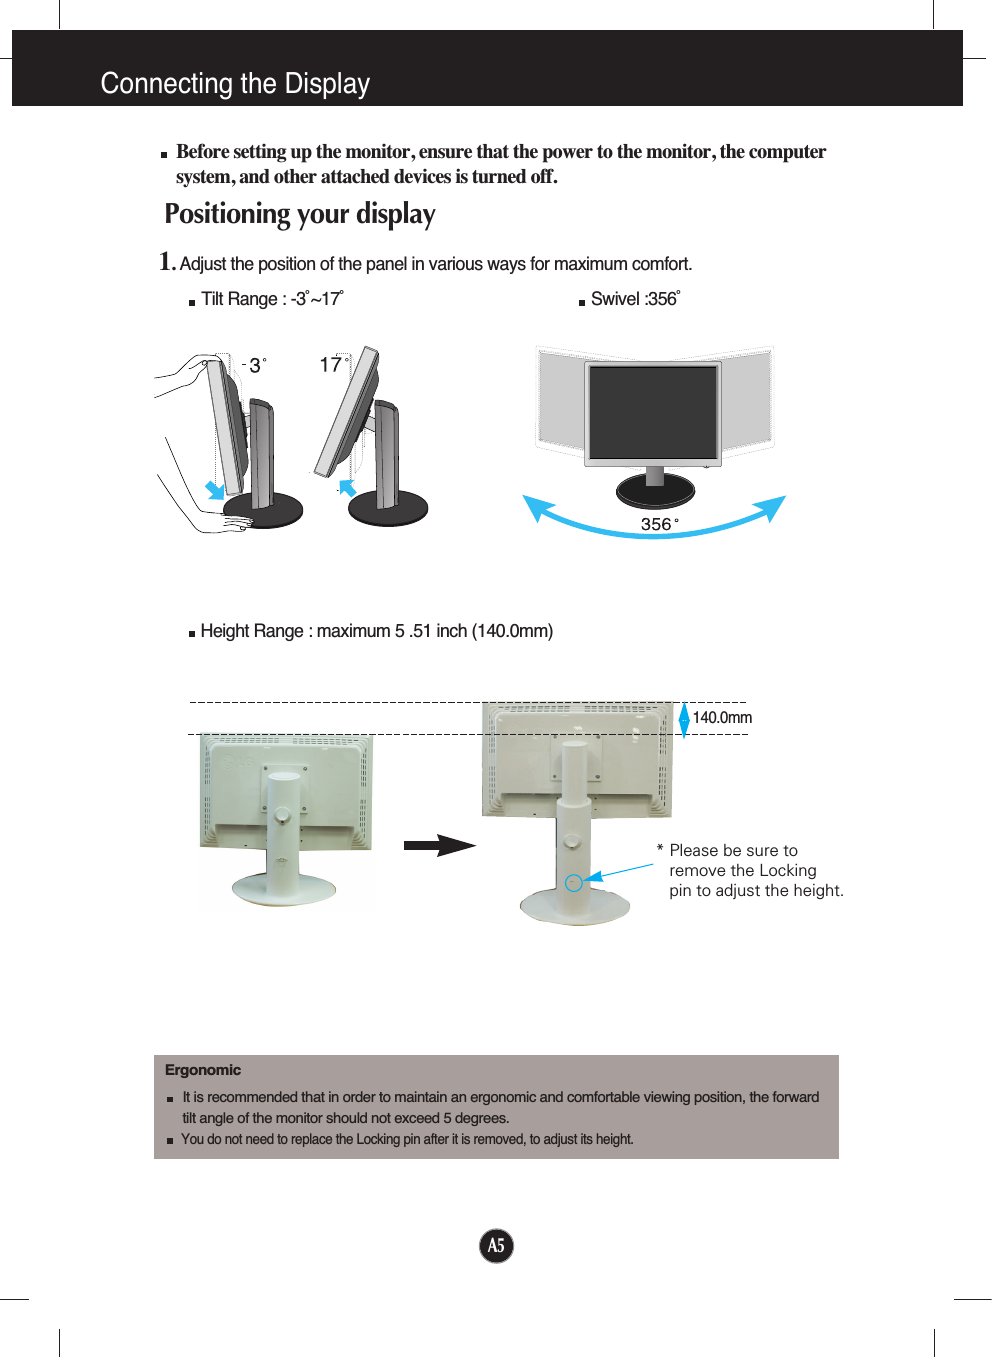 A5Connecting the DisplayBefore setting up the monitor, ensure that the power to the monitor, the computersystem, and other attached devices is turned off. Positioning your display1. Adjust the position of the panel in various ways for maximum comfort.Tilt Range : -3˚~17˚                                                     Swivel :356˚ErgonomicIt is recommended that in order to maintain an ergonomic and comfortable viewing position, the forward tilt angle of the monitor should not exceed 5 degrees.You do not need to replace the Locking pin after it is removed, to adjust its height. Height Range : maximum 5 .51 inch (140.0mm)140.0mm* Please be sure to       remove the Locking pin to adjust the height.   